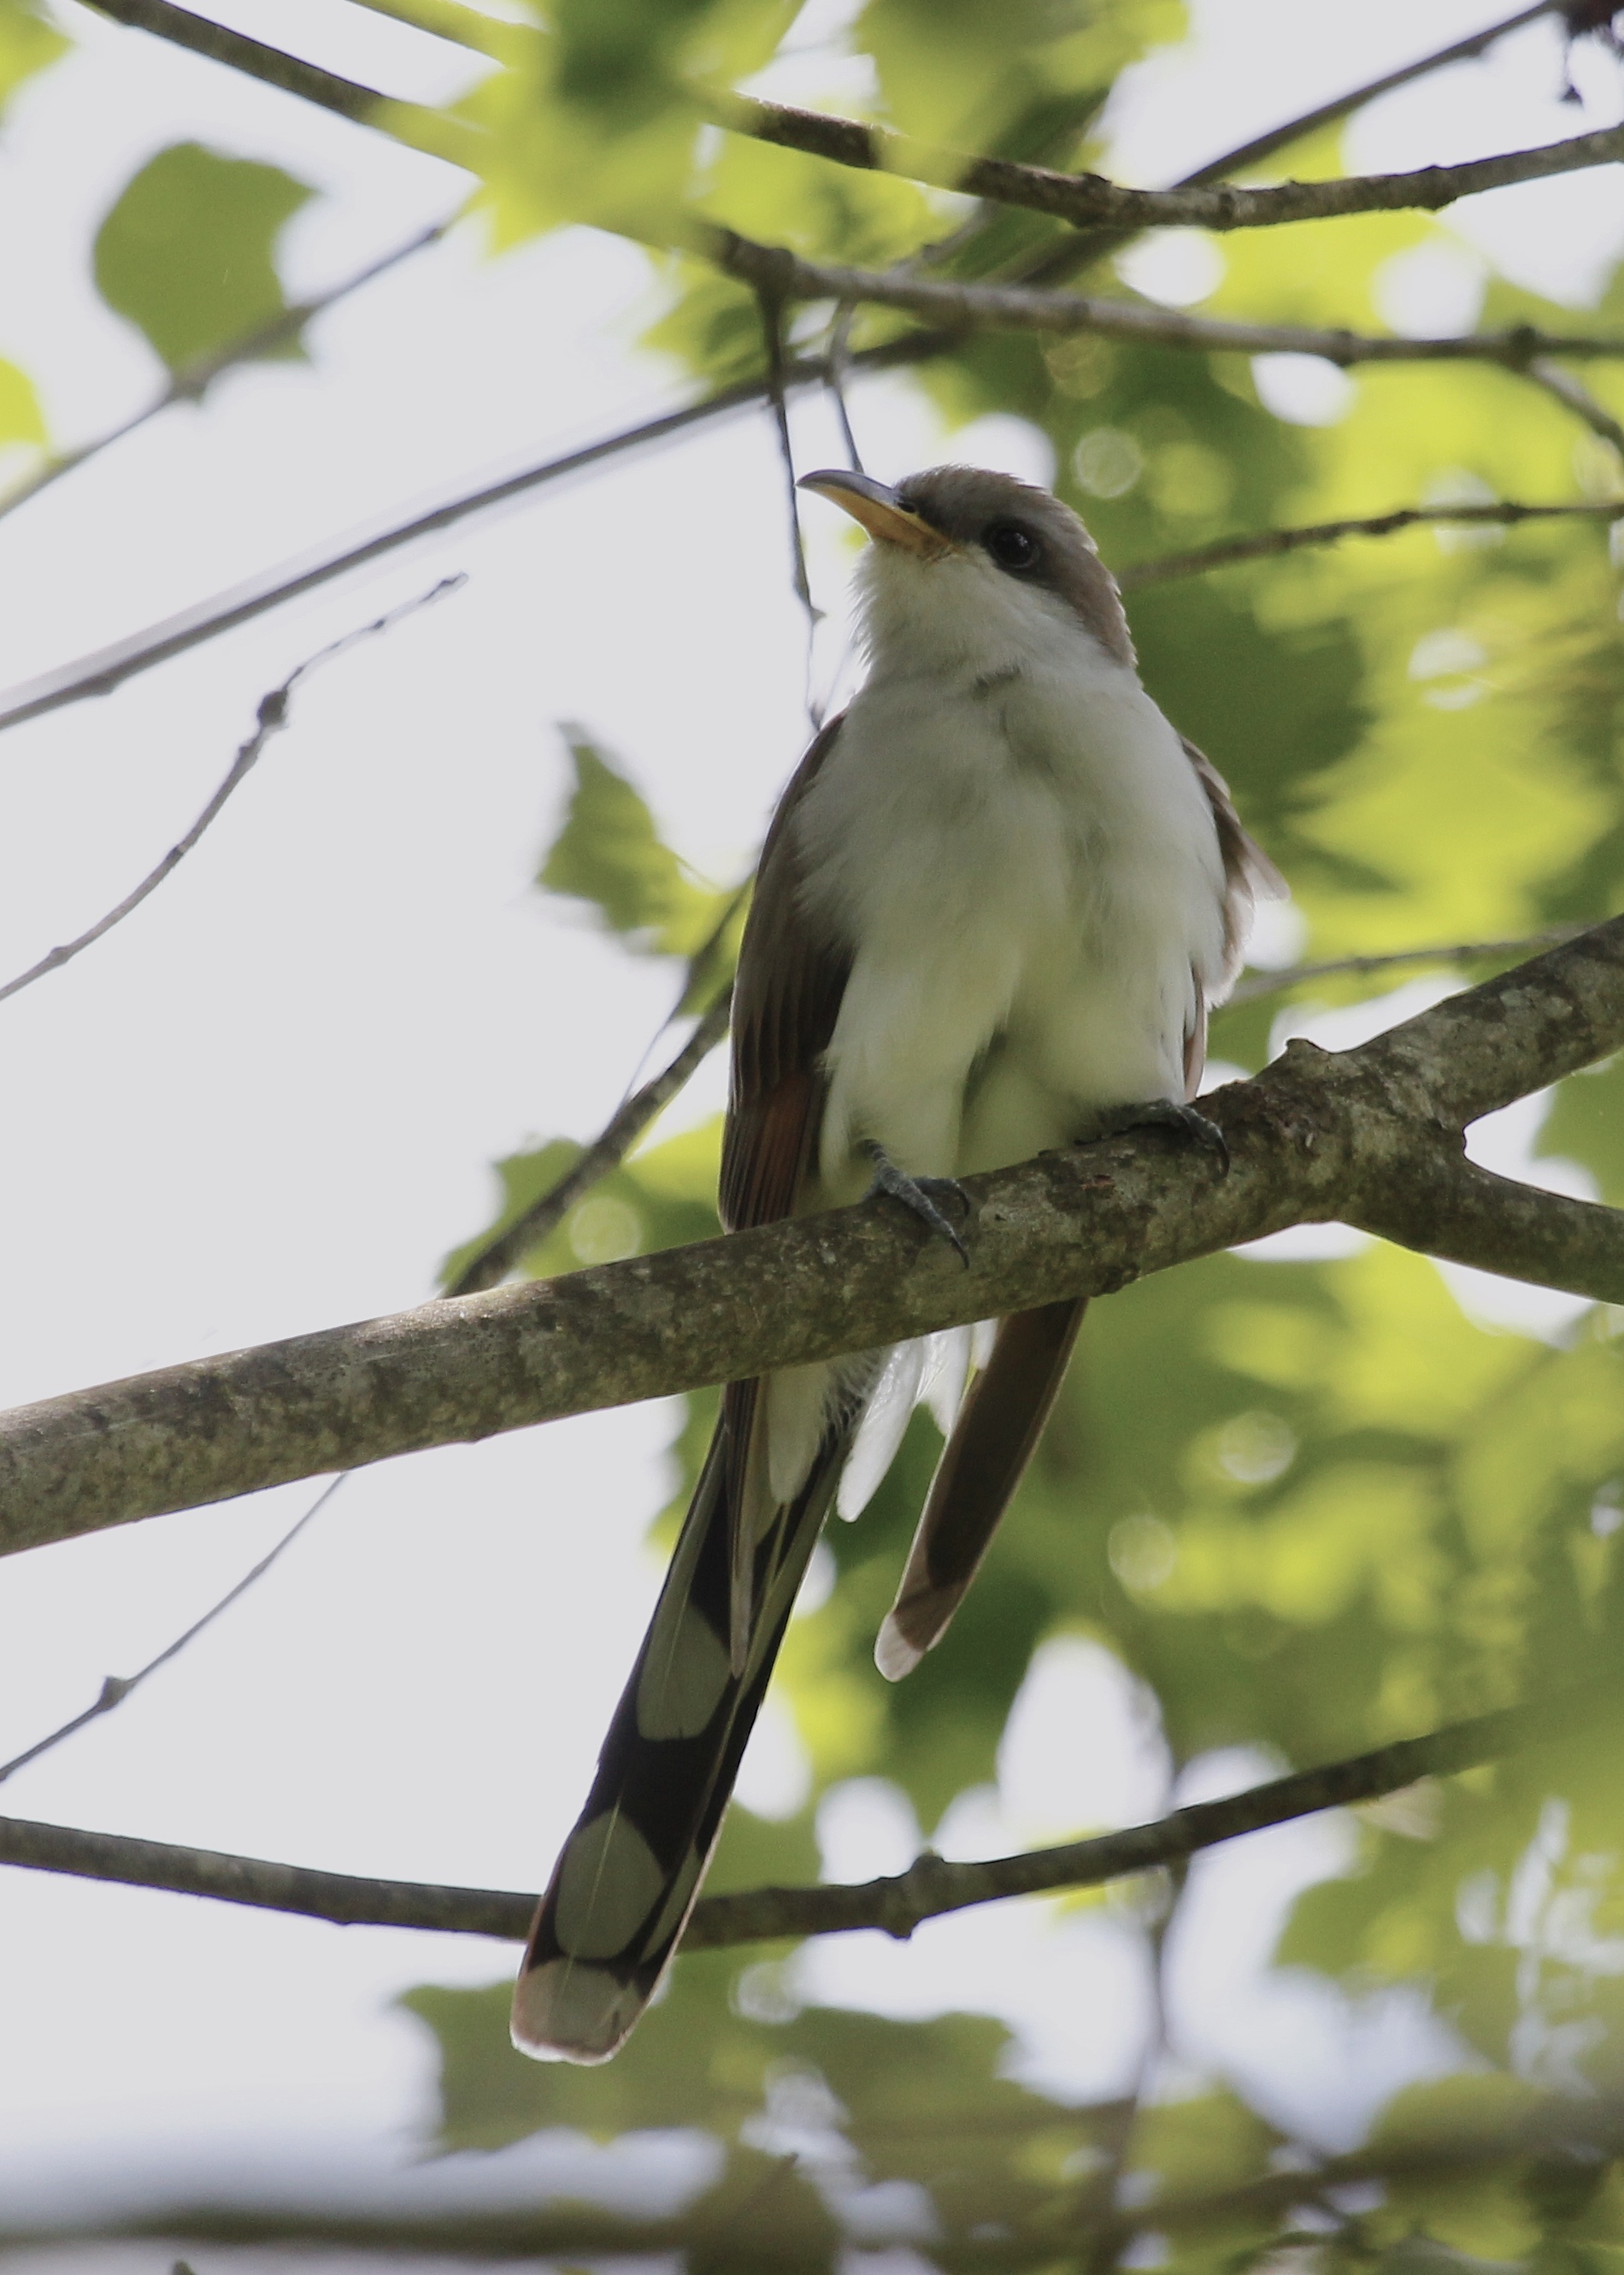 This is the bird I wanted to see more than any on this day - Yellow-billed Cuckoo at the Nature Trail, Basha Kill WMA 5/26/13.